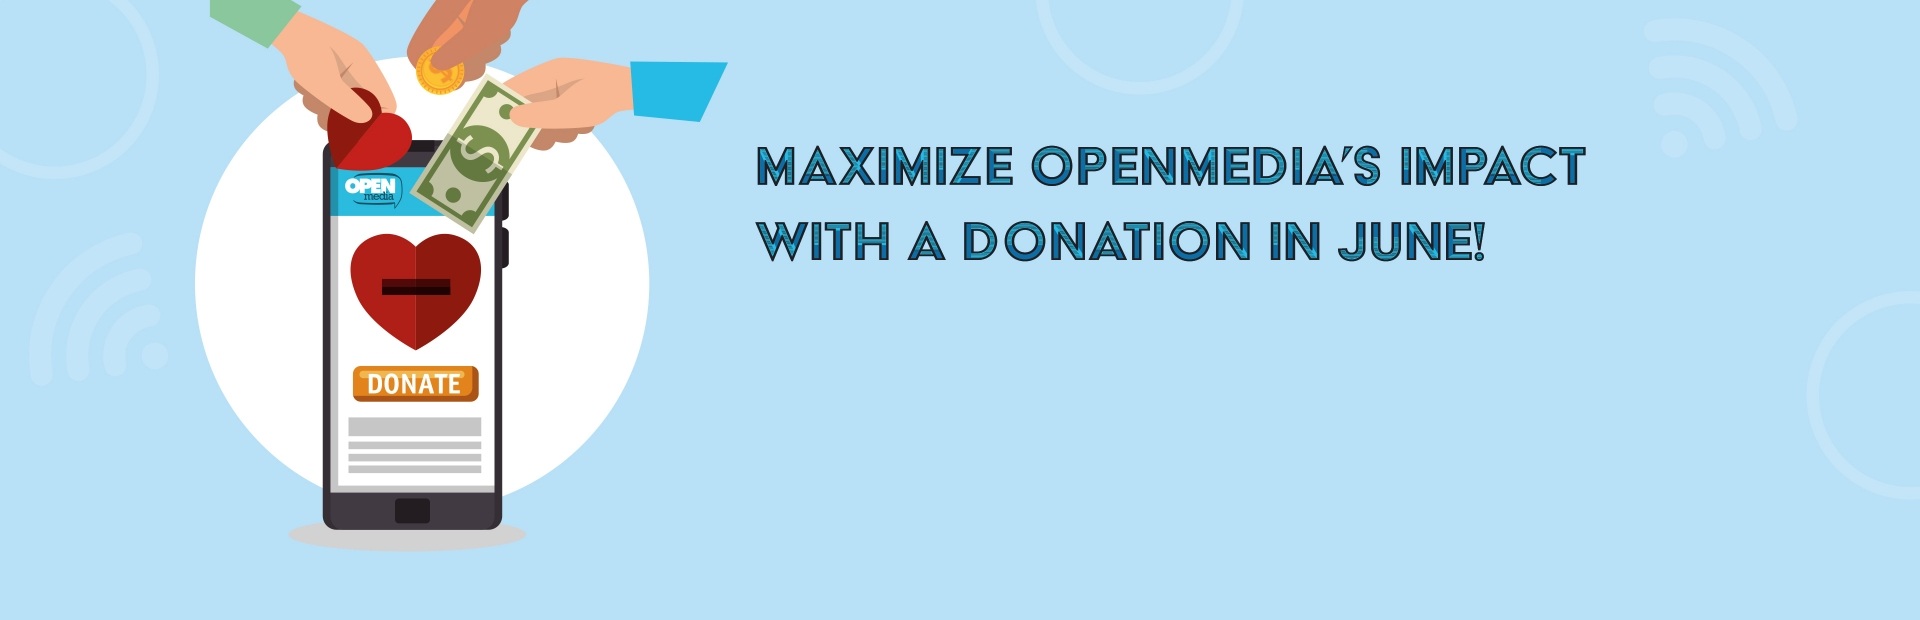  Maximize OpenMedia’s impact with a donation in June!